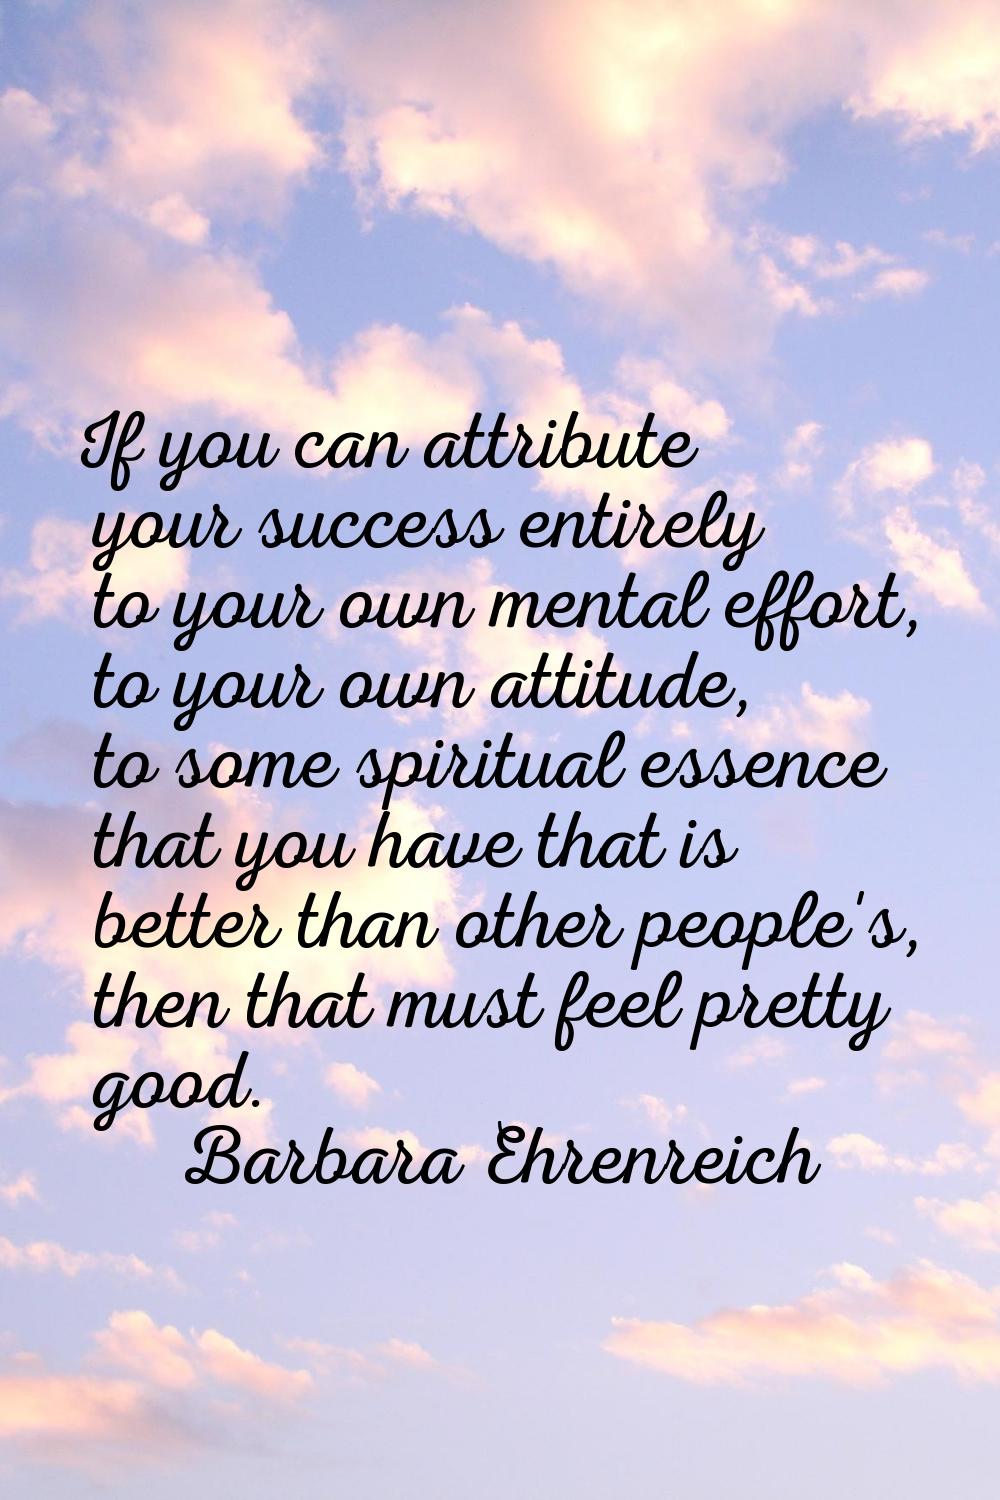 If you can attribute your success entirely to your own mental effort, to your own attitude, to some